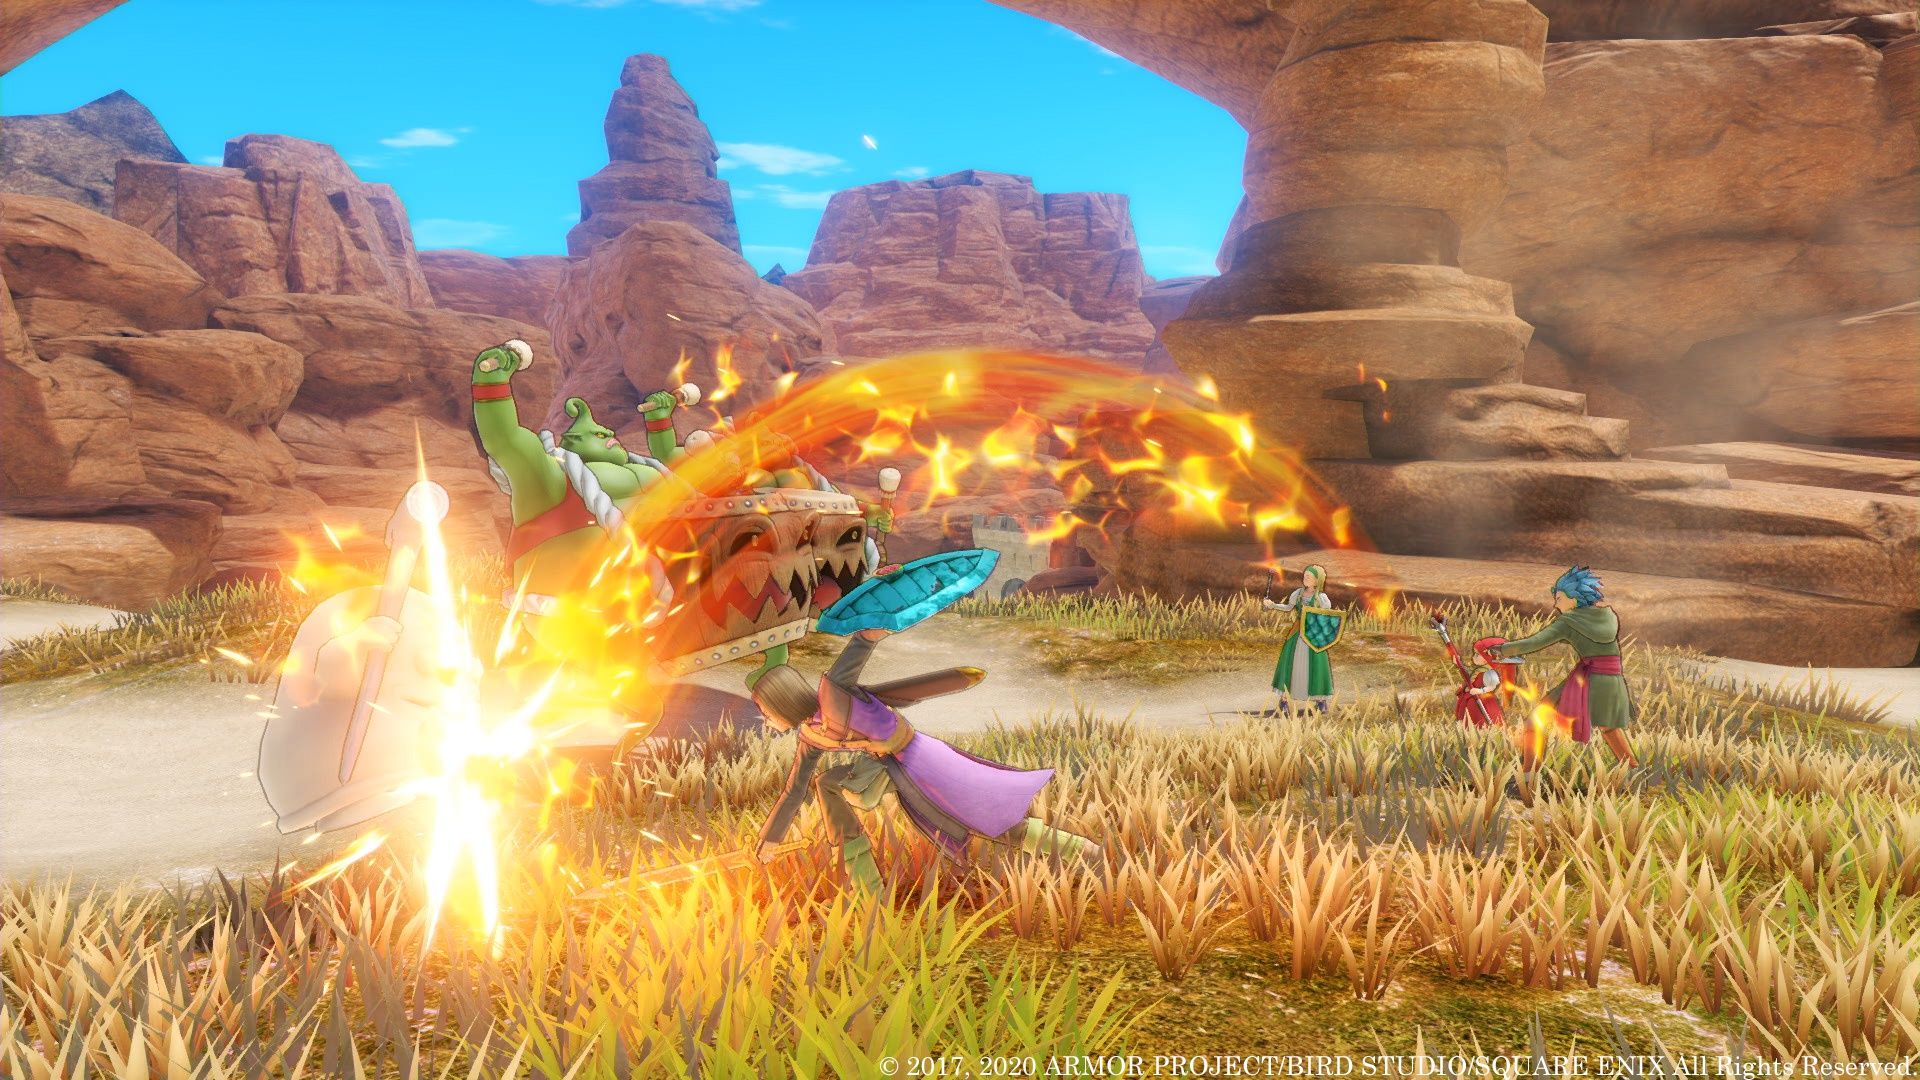 The New Dragon Quest XI S Demo is a Great Way to Try Out One of The Best JRPGs